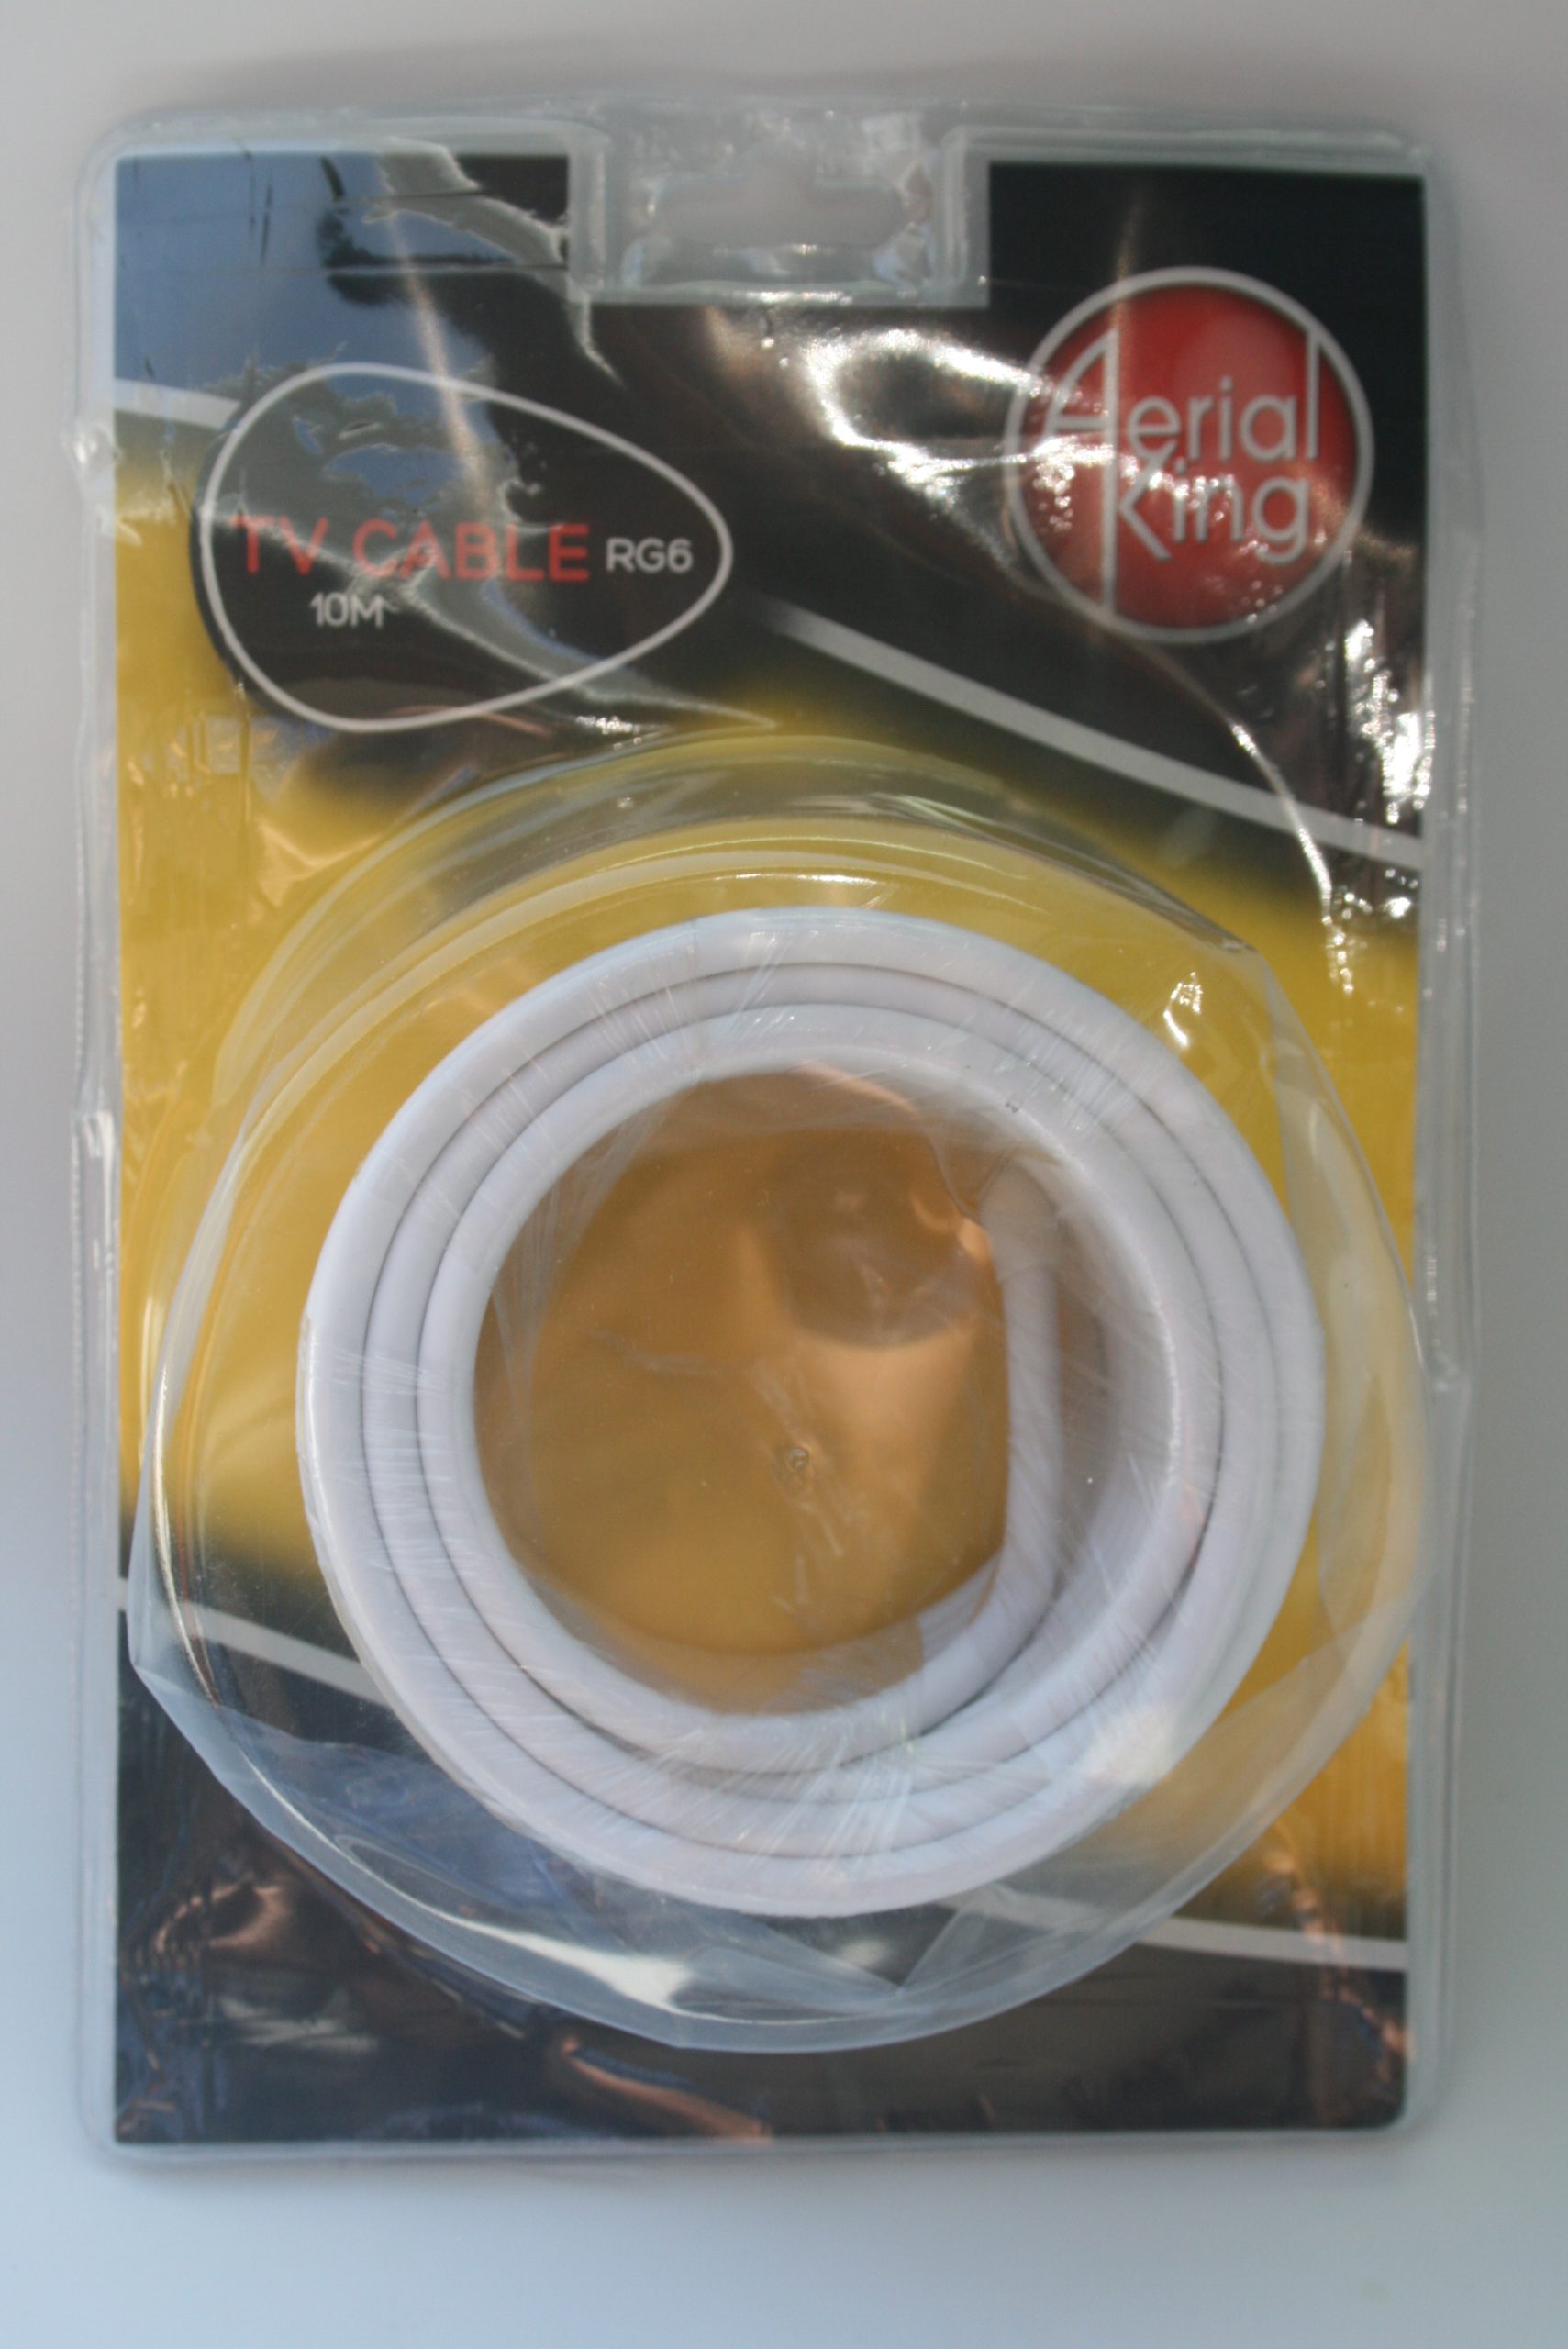 Cable Rg6 White (10M) Retail